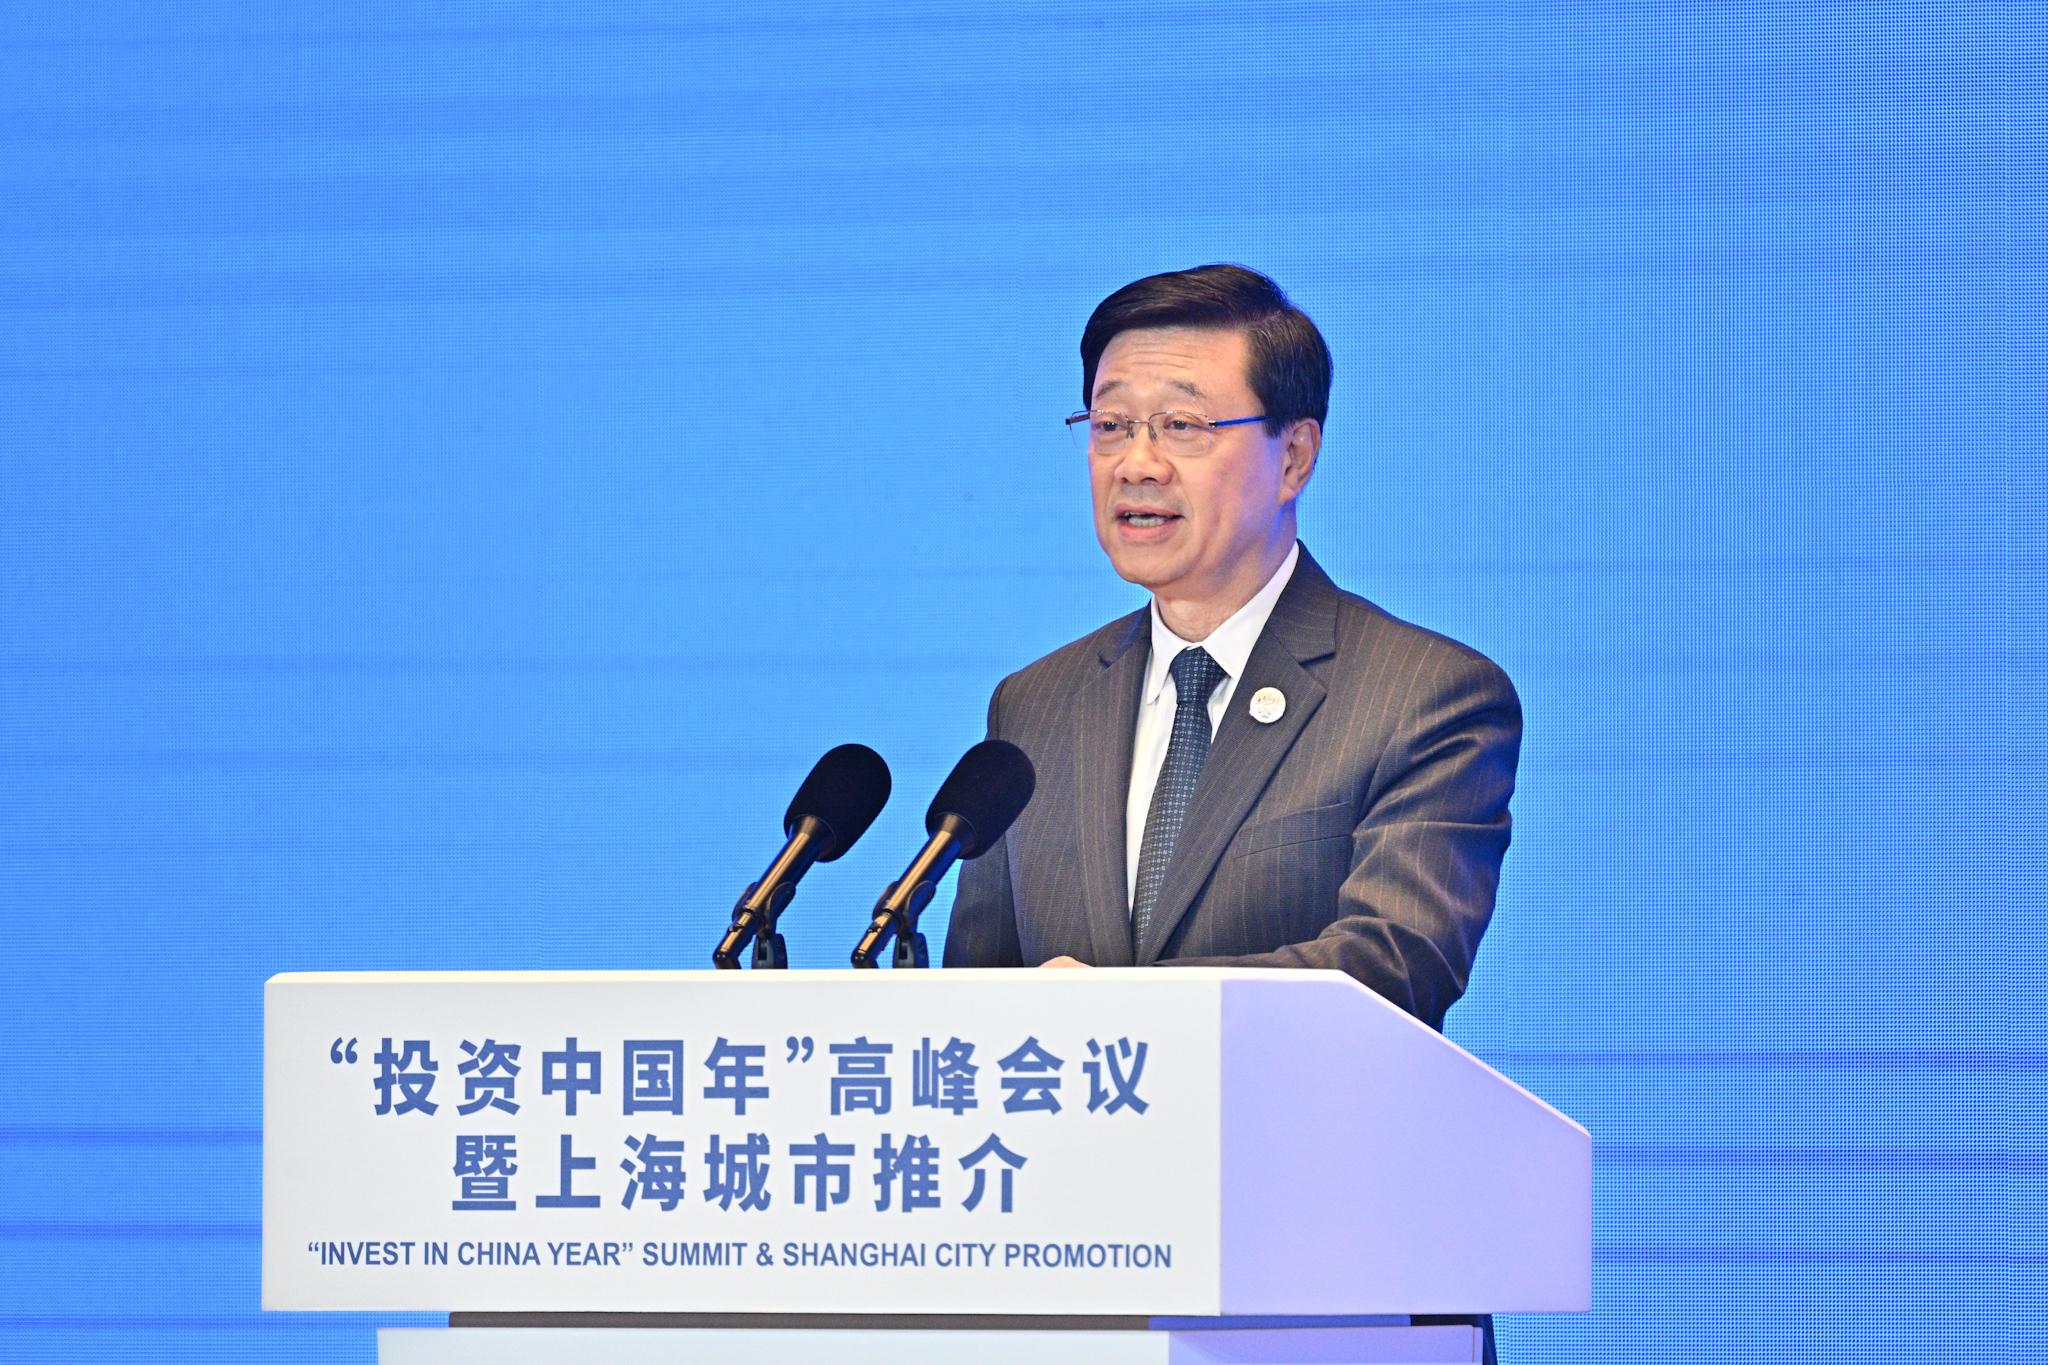 The Chief Executive, Mr John Lee, attended the "Invest in China Year" Summit & Shanghai City Promotion in Shanghai today (November 5). Photo shows Mr Lee speaking at the event.